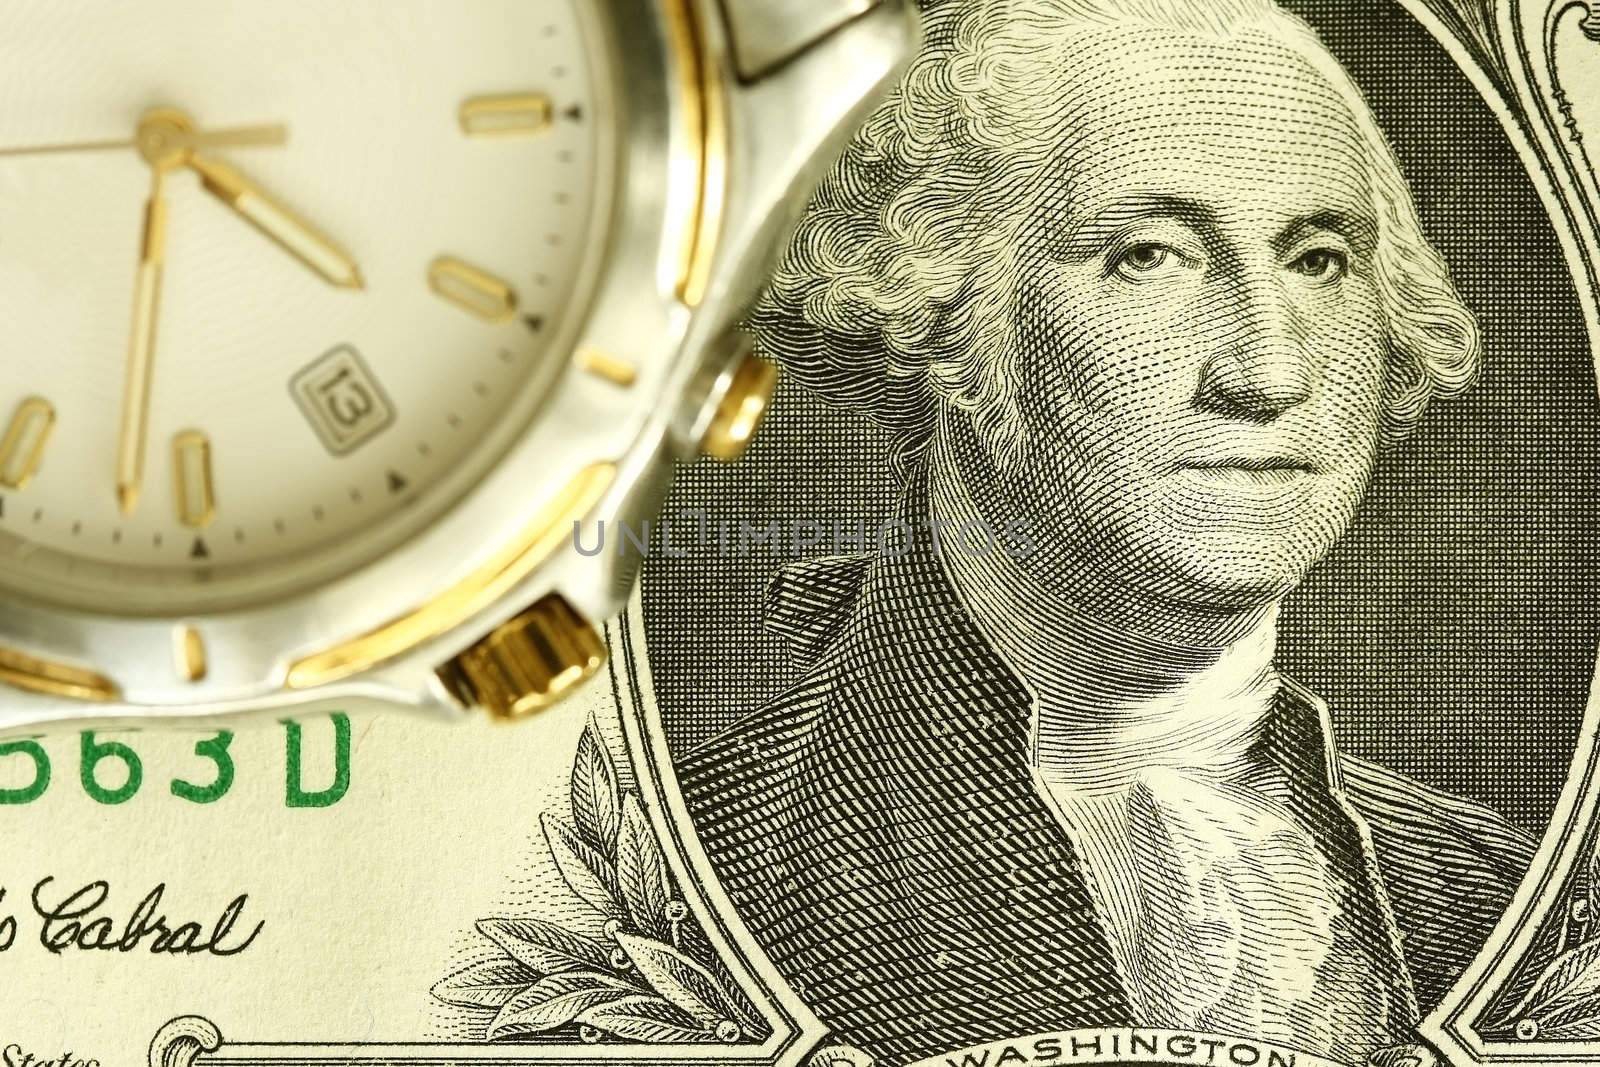 Wrist watch and US currency - concept for time is money.